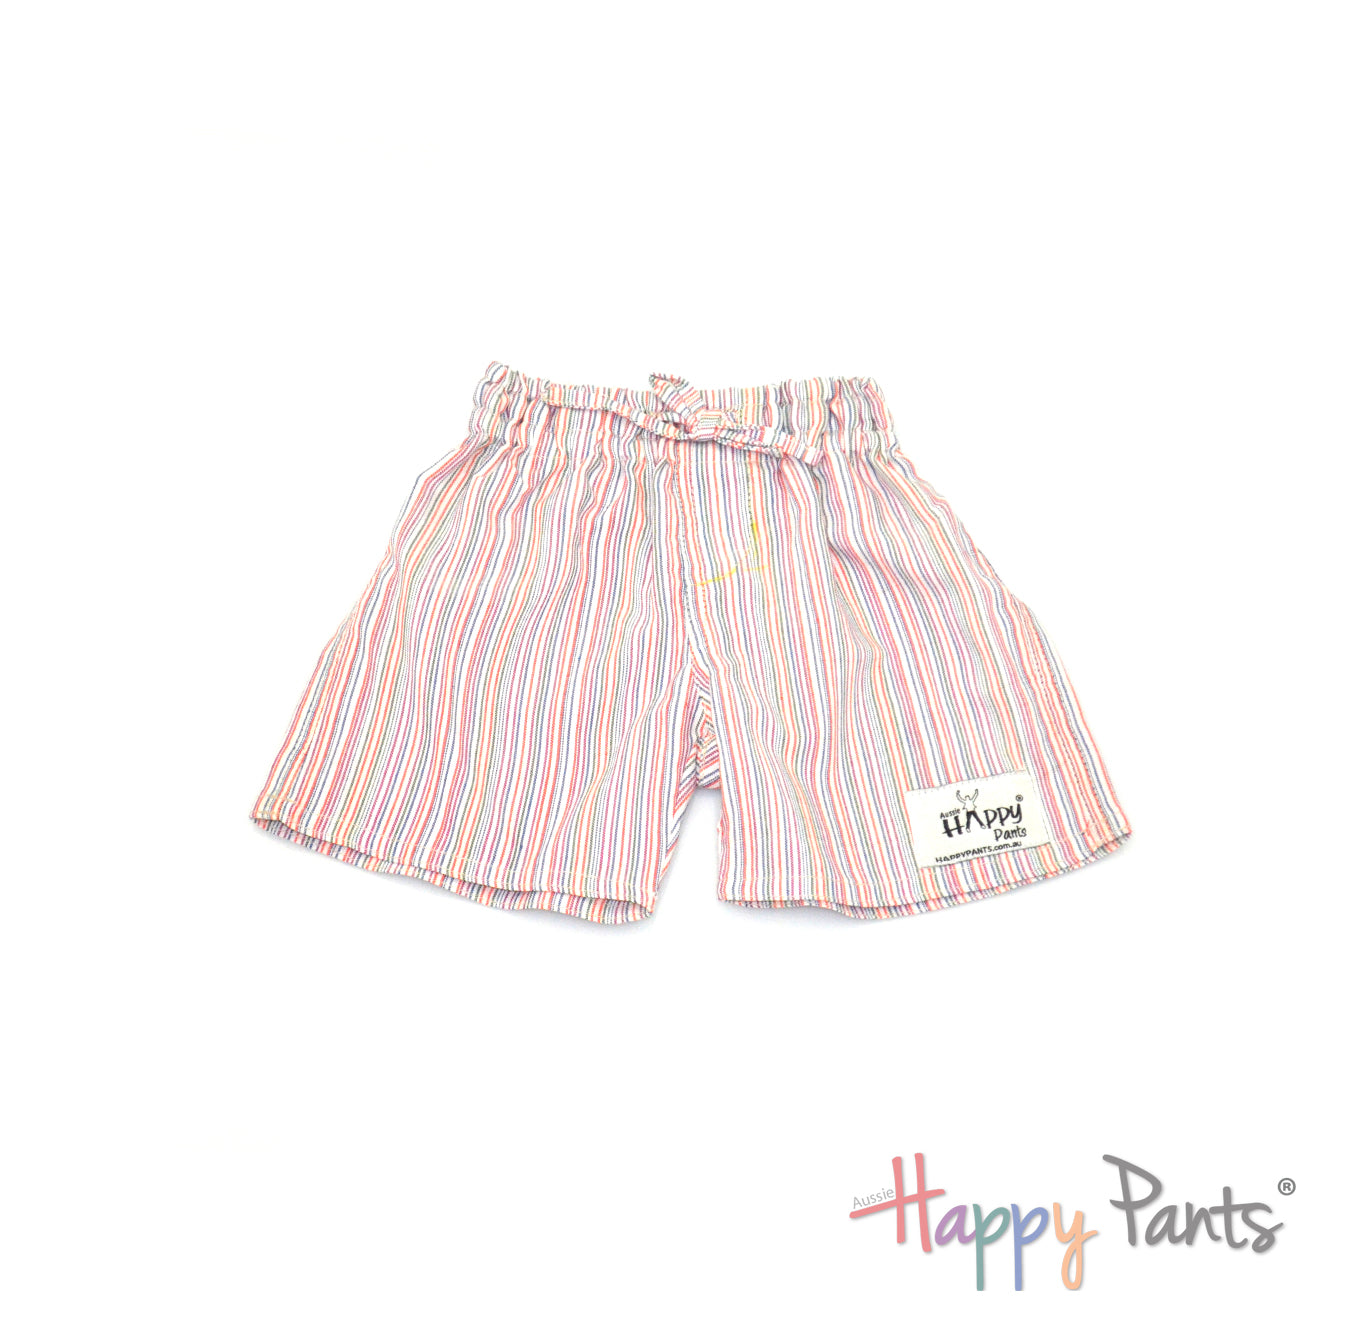 Cotton Candy Dreams Shorts for Boys